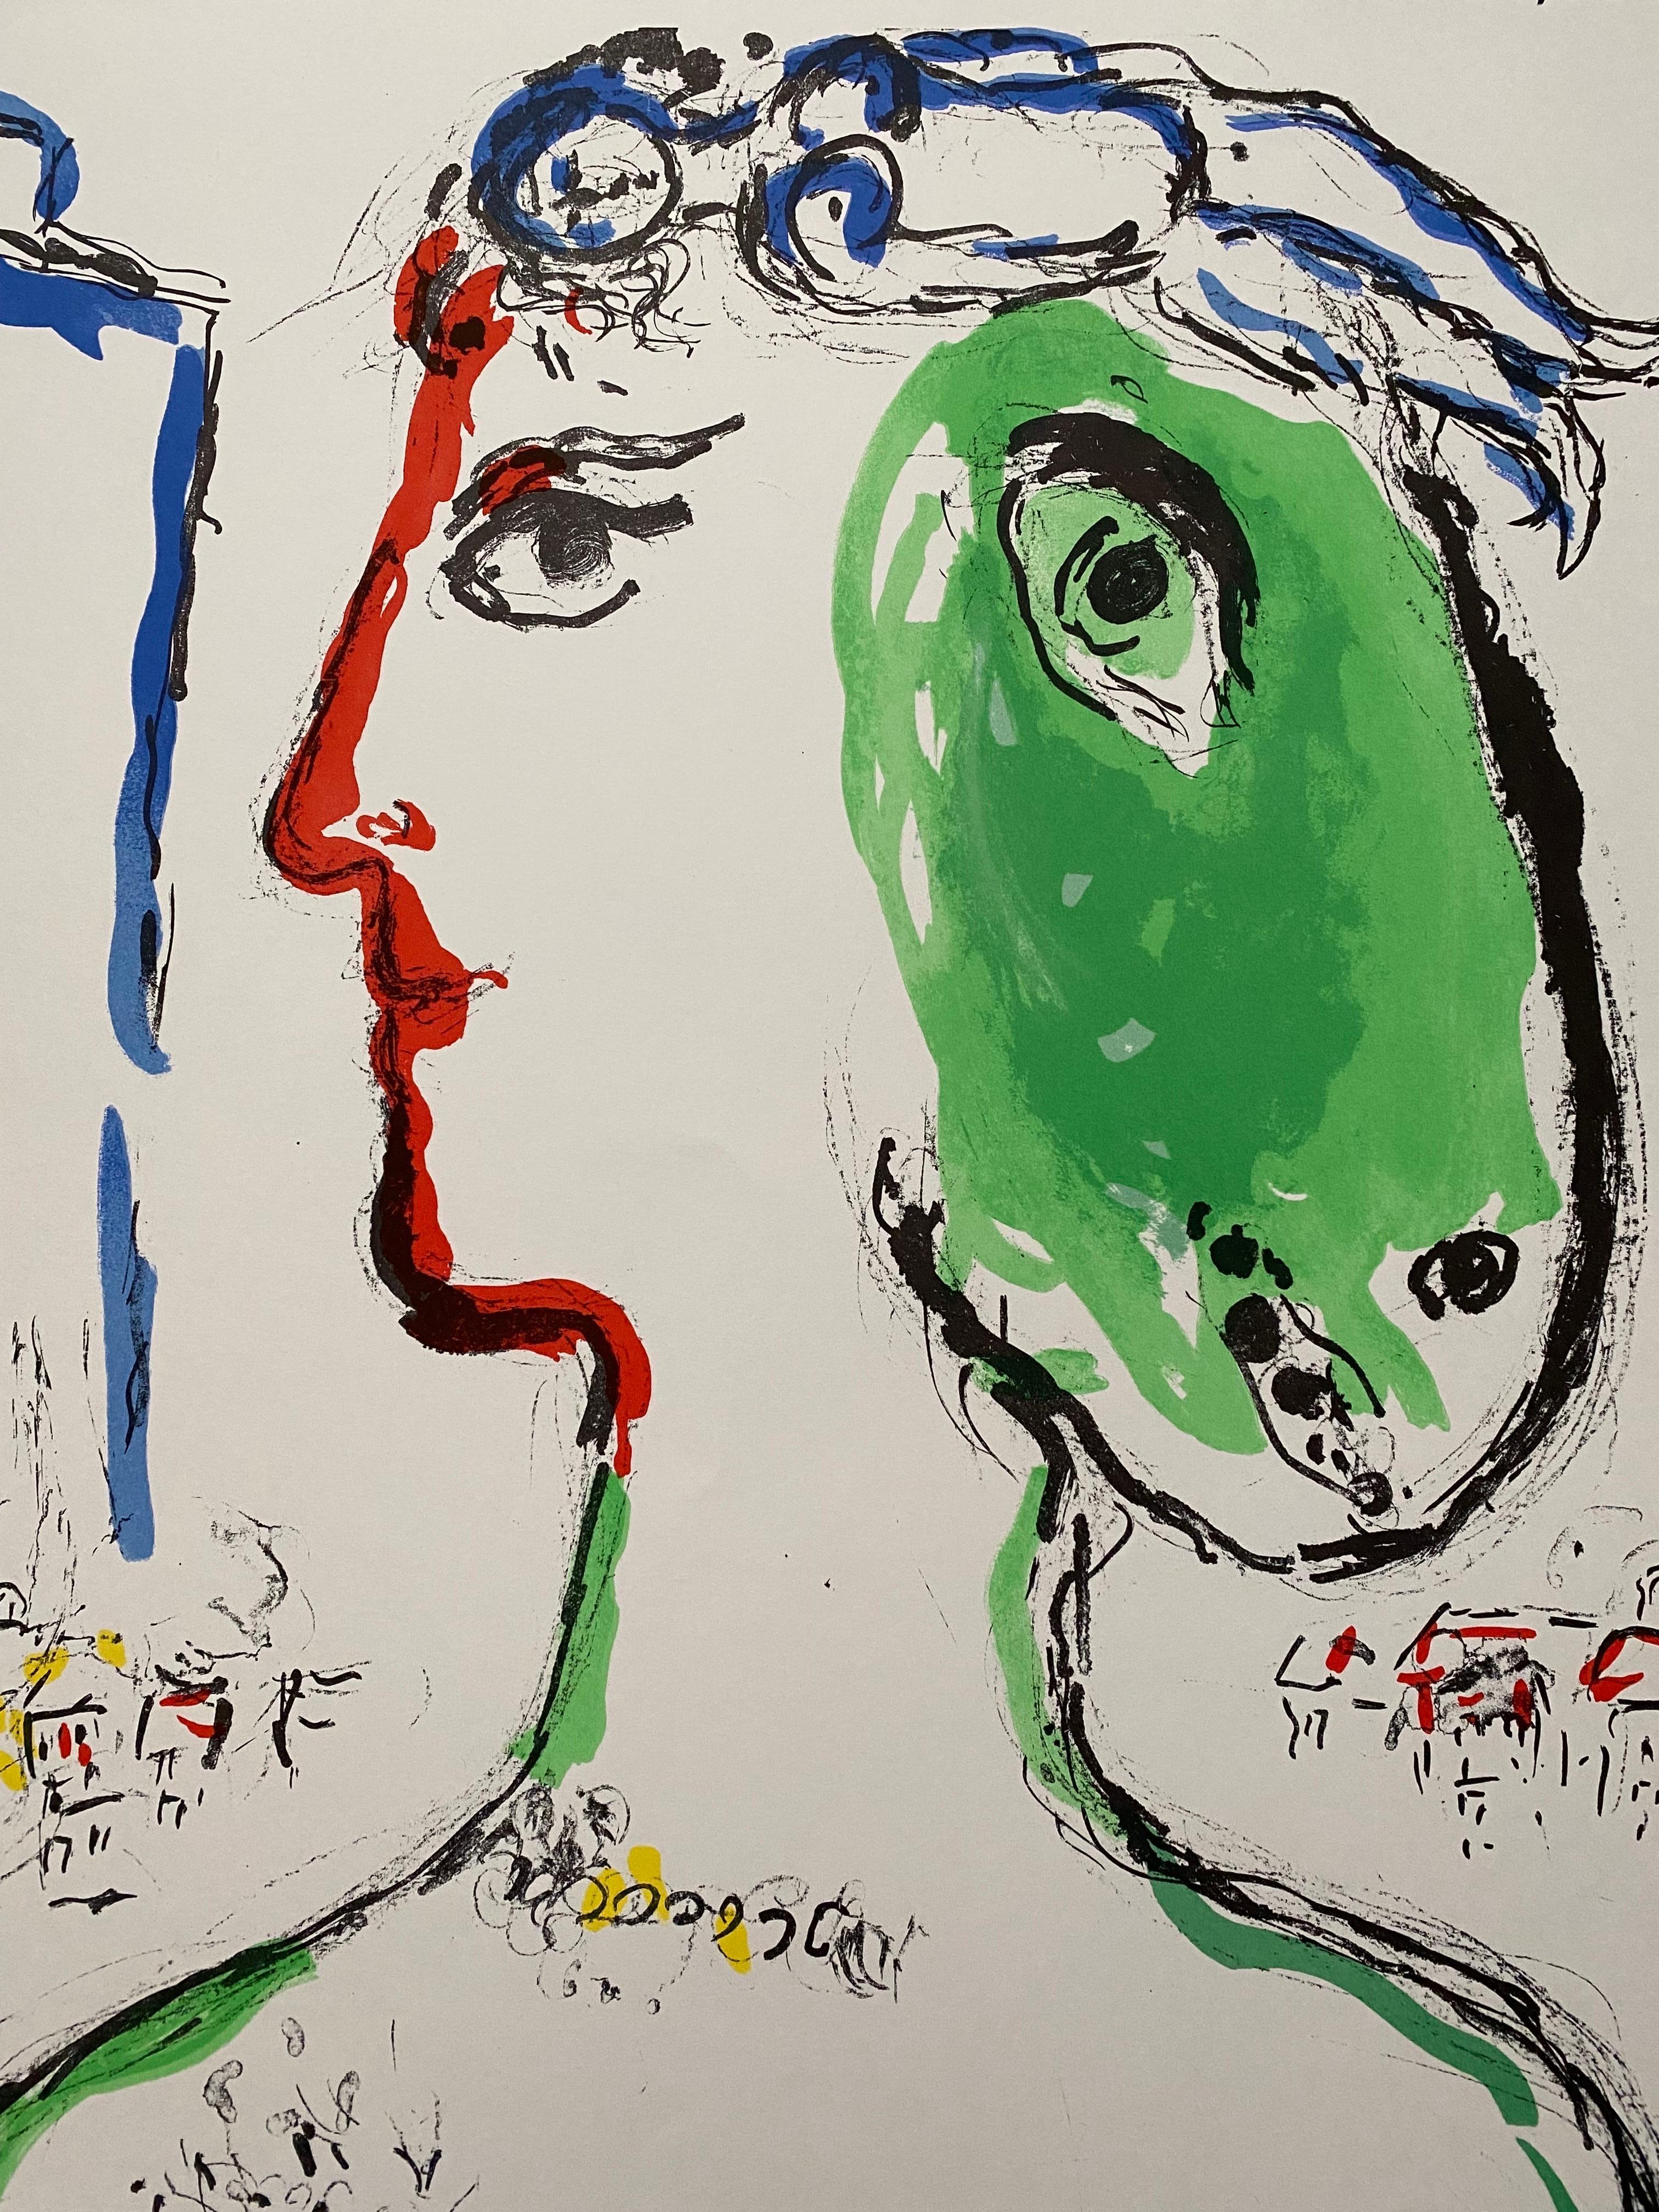 Beautiful Marc Chagall lithographic poster depicting 